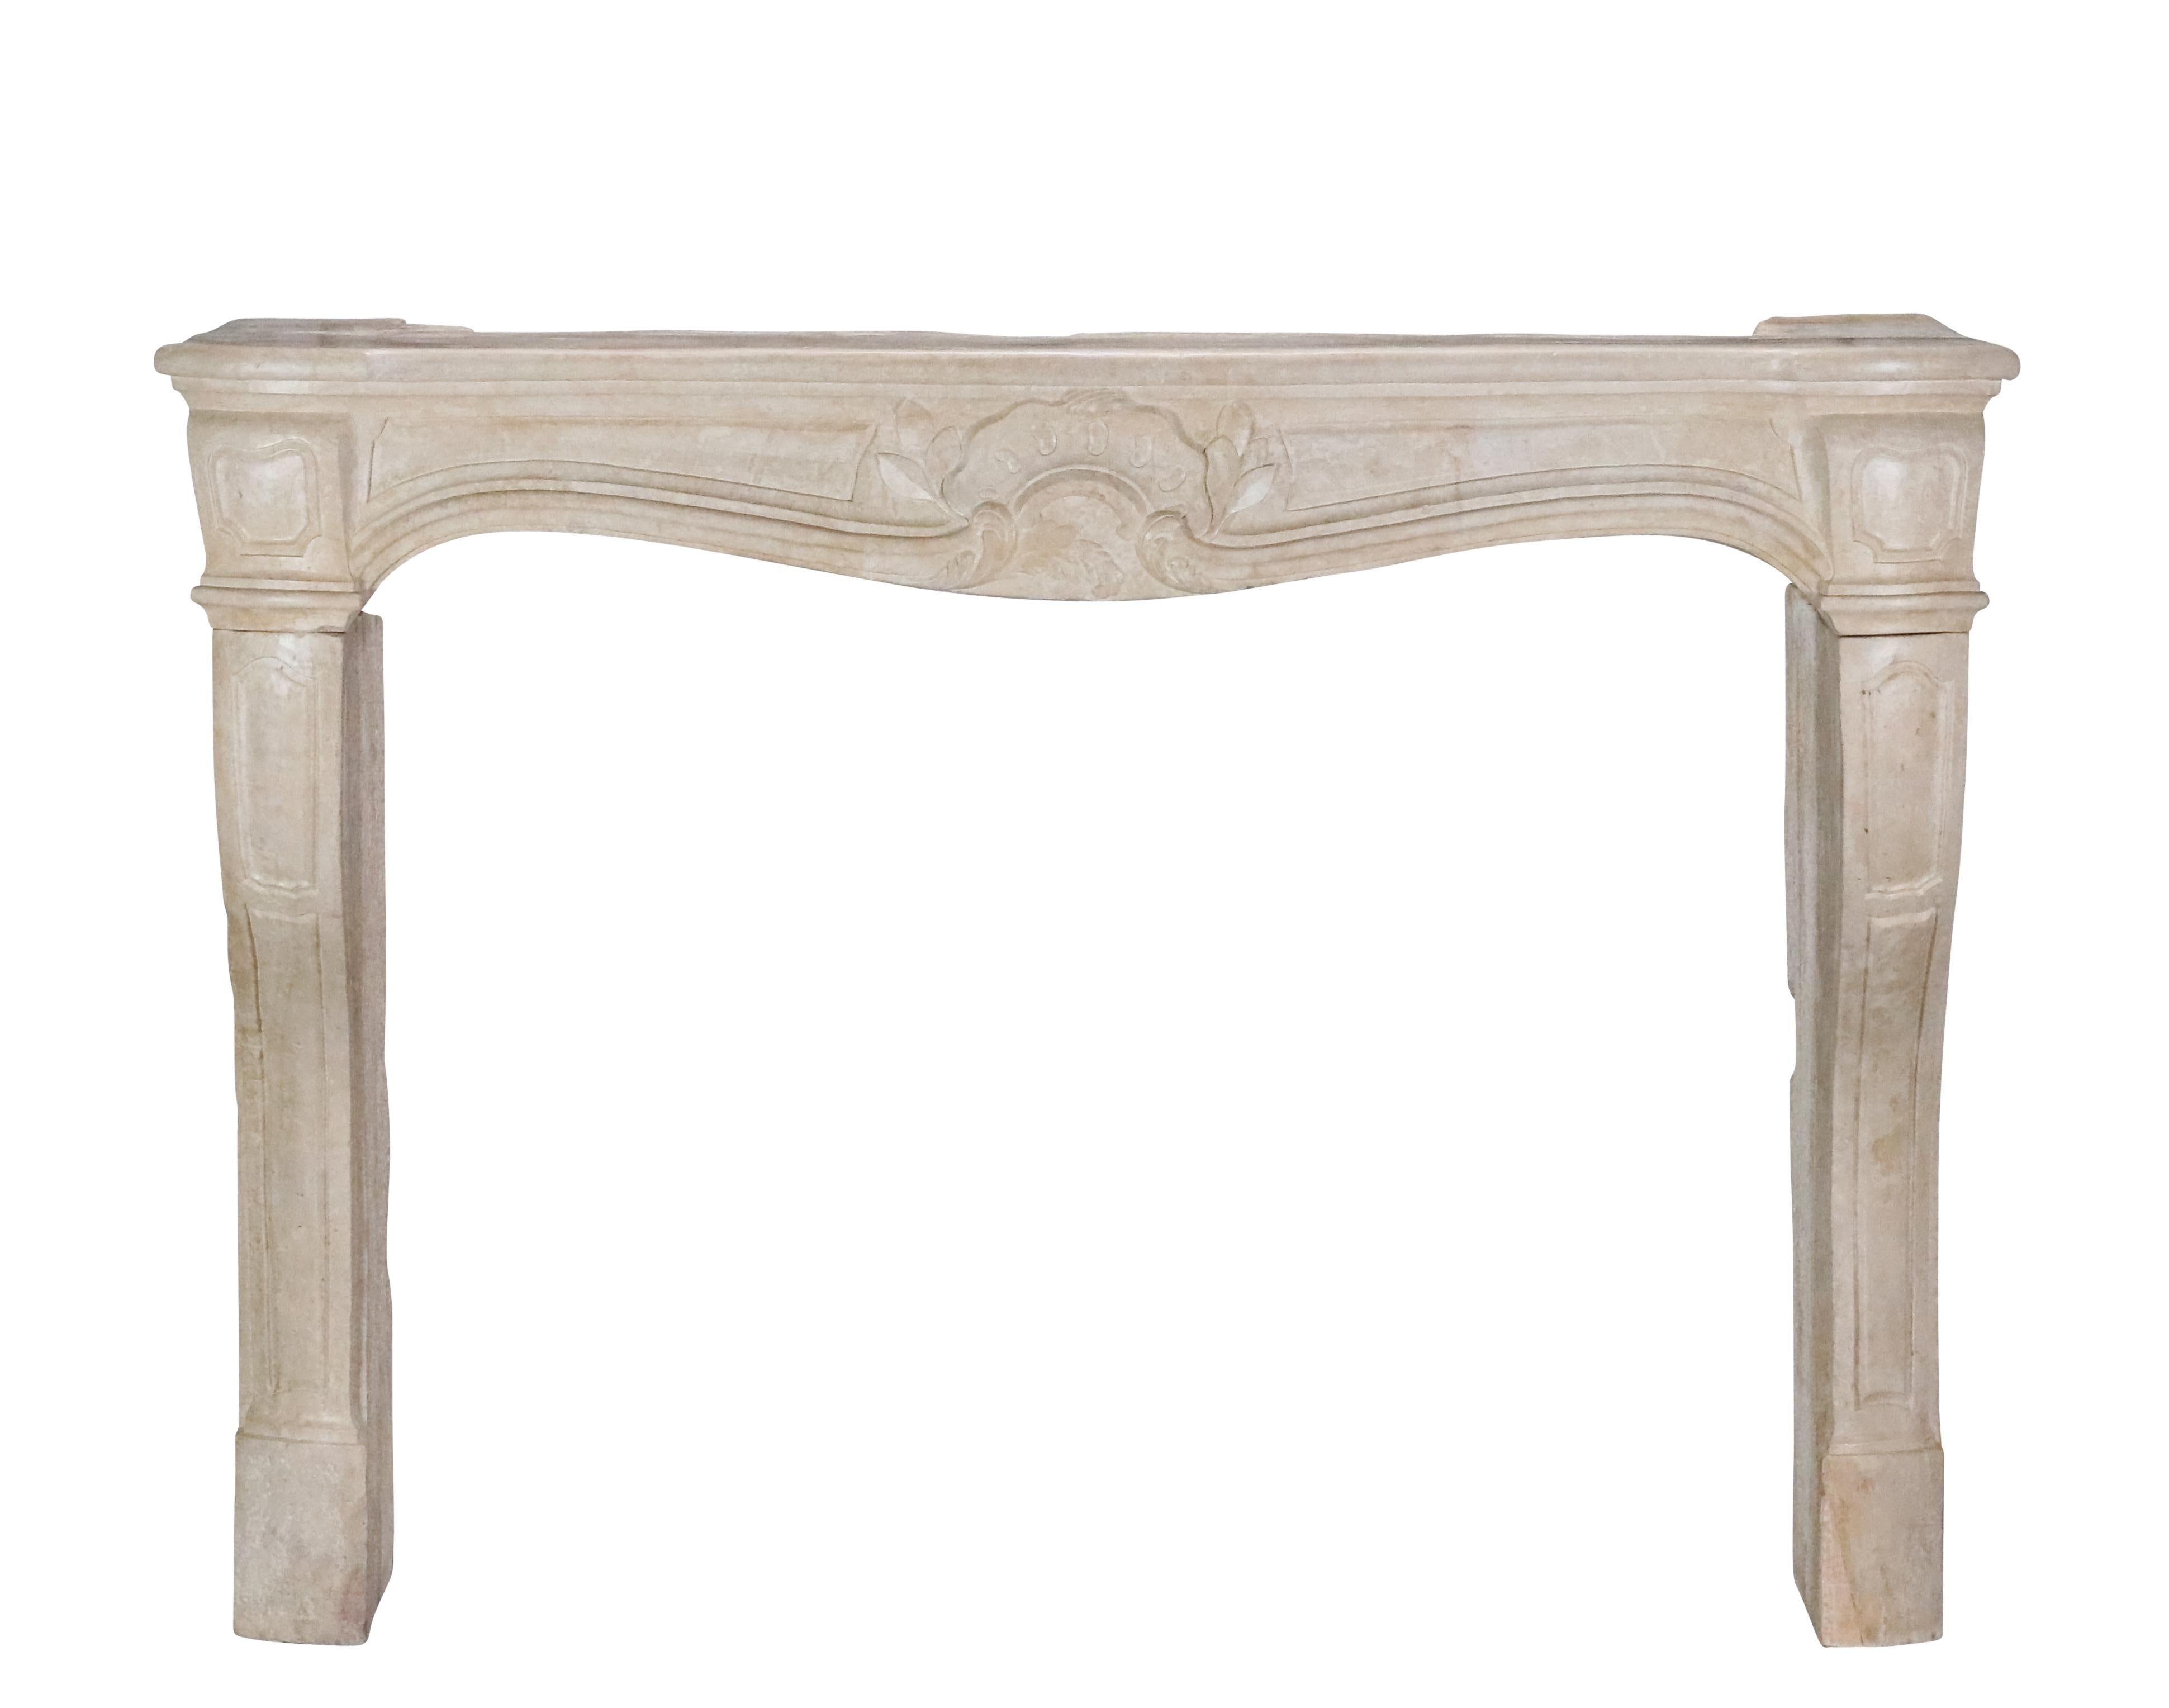 18th Century Classic French Regency Period Light Limestone Fireplace Mantle For Sale 1